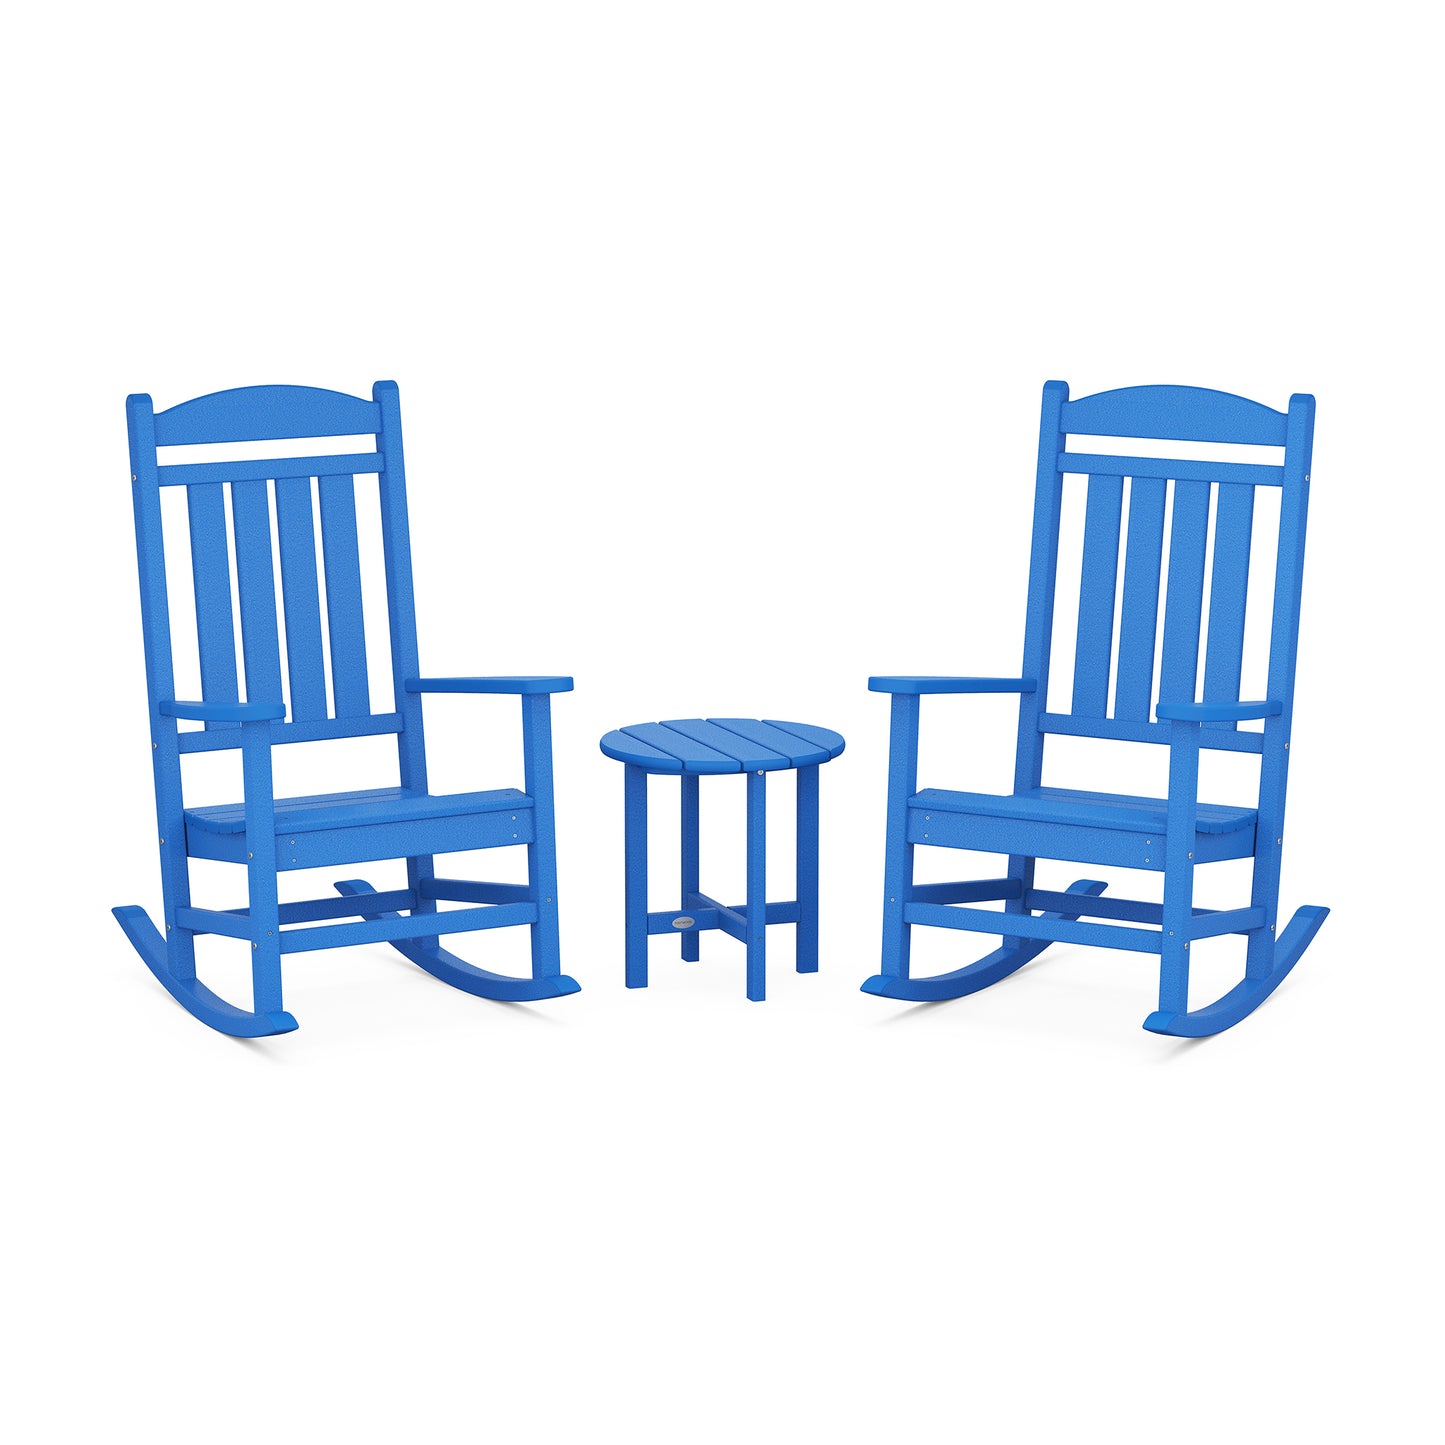 Two blue POLYWOOD Presidential 3-Piece Rocker Sets facing each other with a small blue round table between them, isolated on a white background.